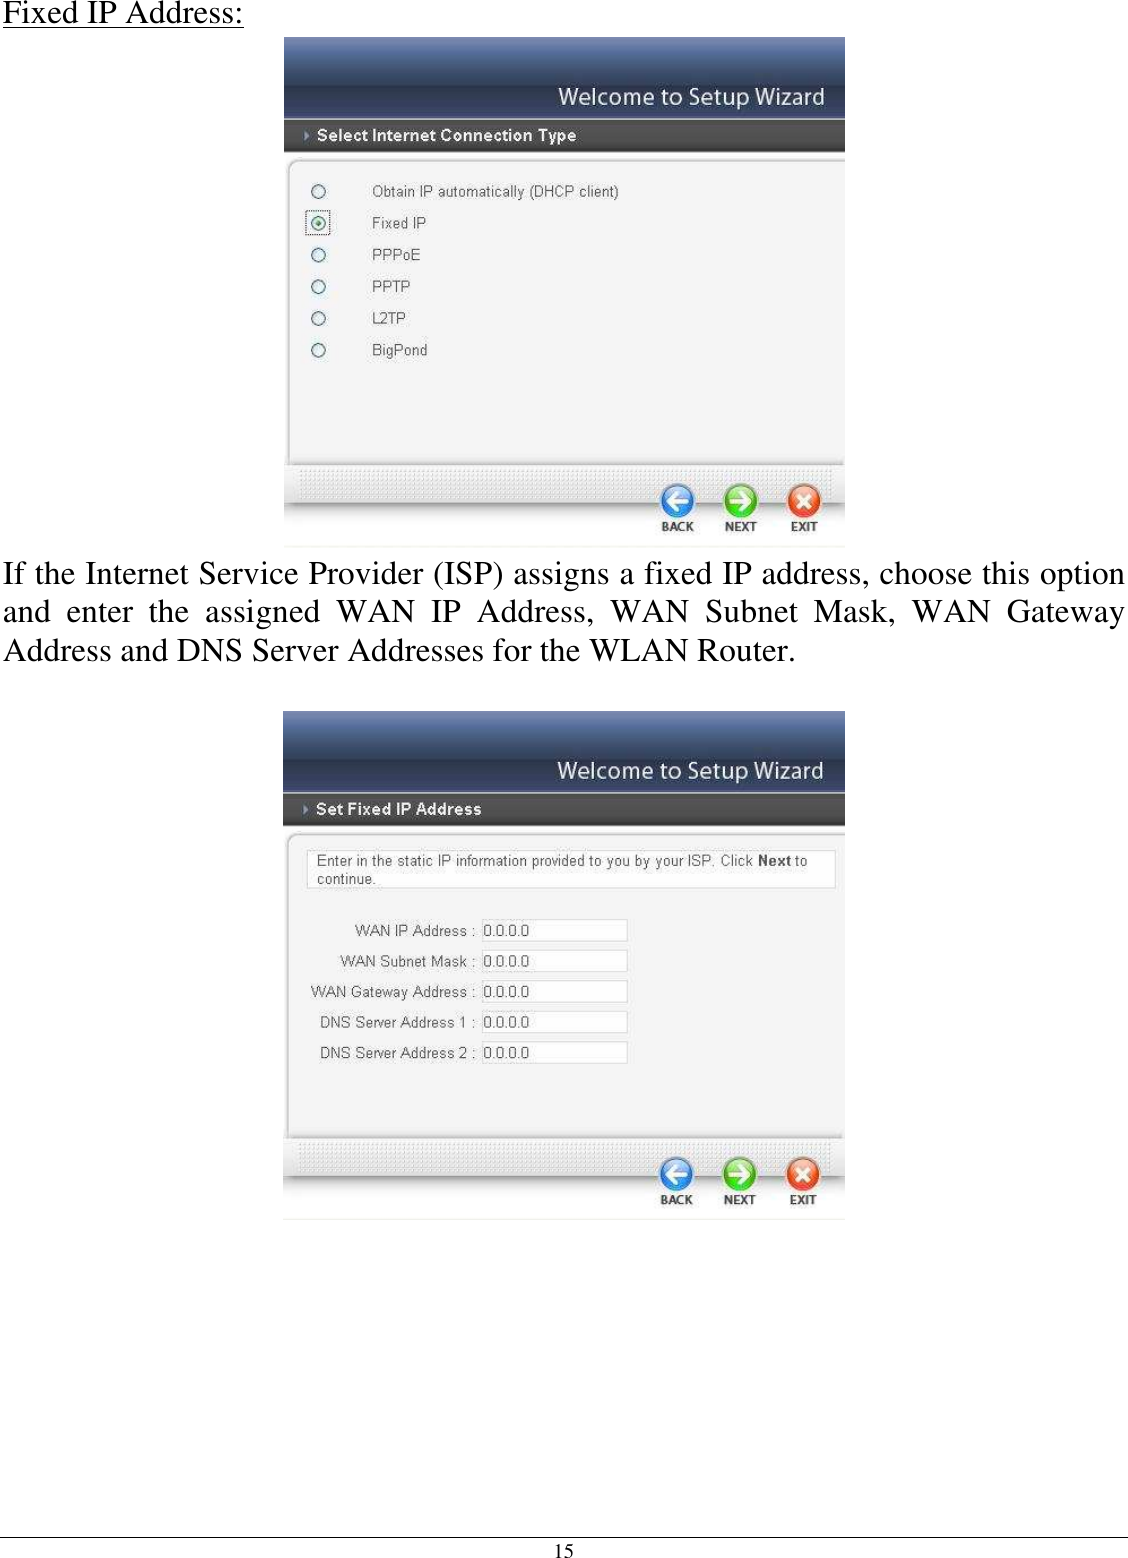 15 Fixed IP Address:  If the Internet Service Provider (ISP) assigns a fixed IP address, choose this option and  enter  the  assigned  WAN  IP  Address,  WAN  Subnet  Mask,  WAN  Gateway Address and DNS Server Addresses for the WLAN Router.    